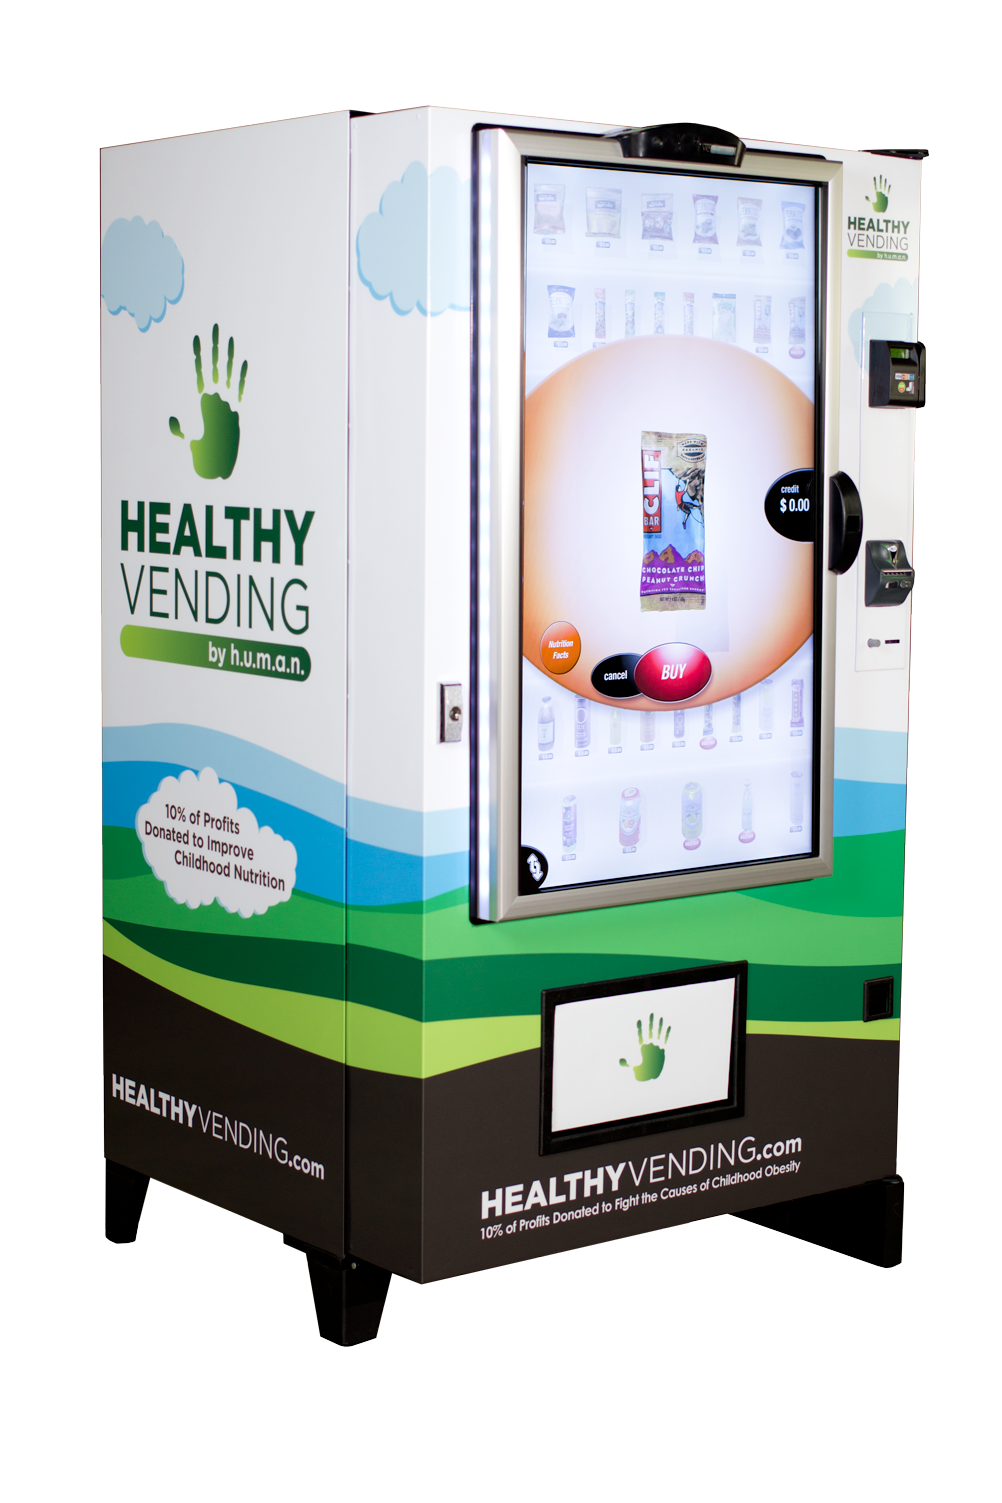 "The HUMAN Touch" is an innovative 46" healthy vending touch screen